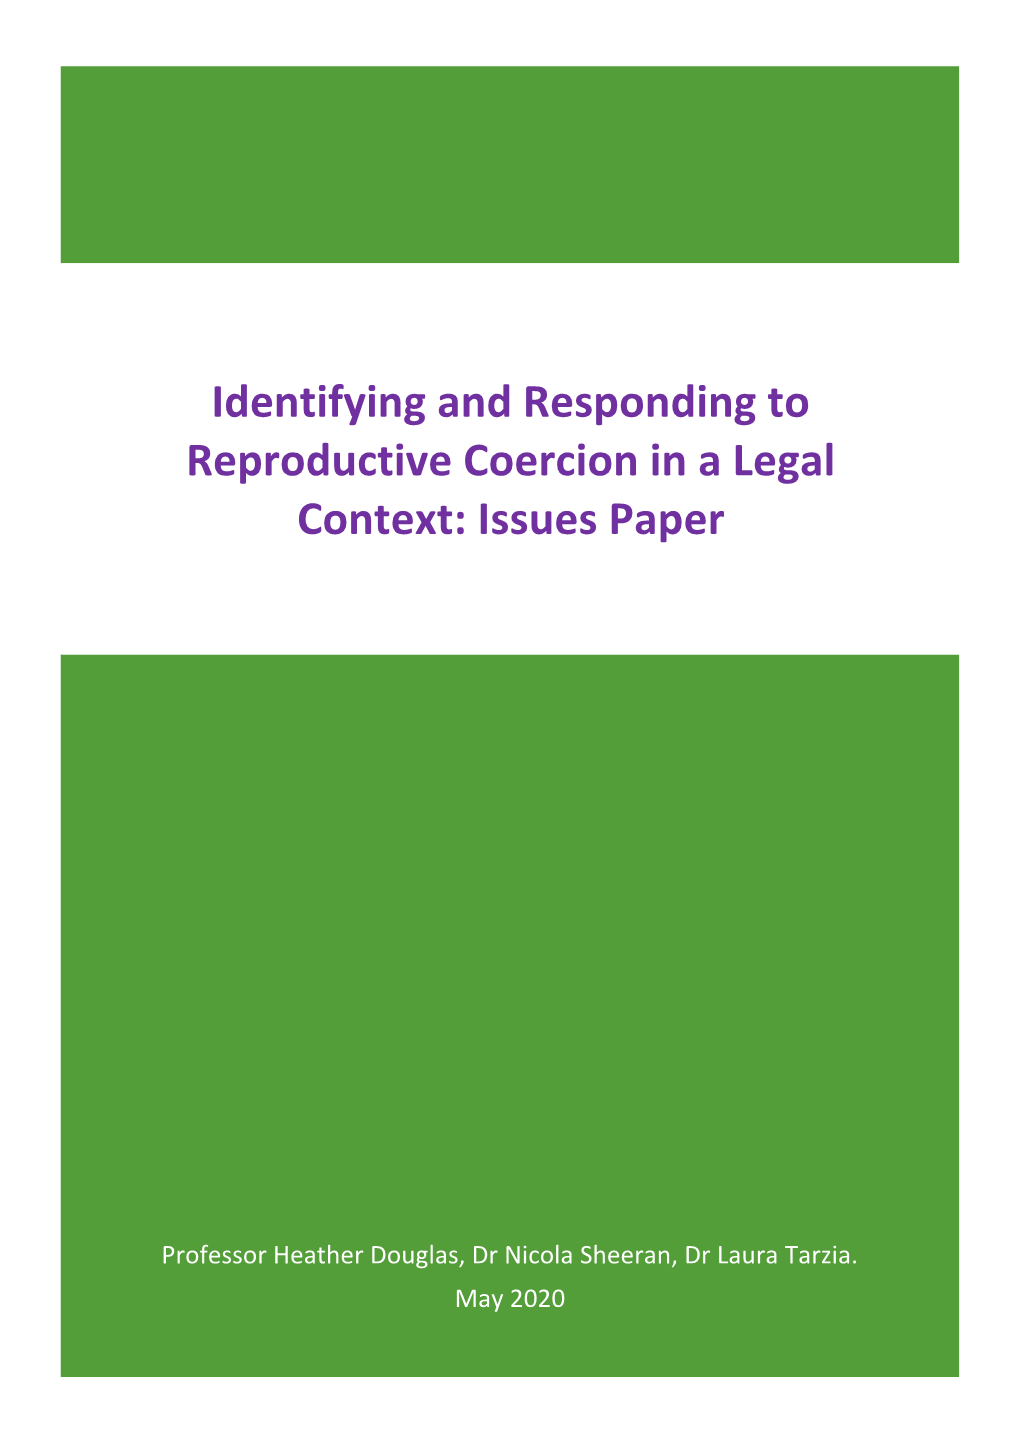 Identifying and Responding to Reproductive Coercion in a Legal Context: Issues Paper